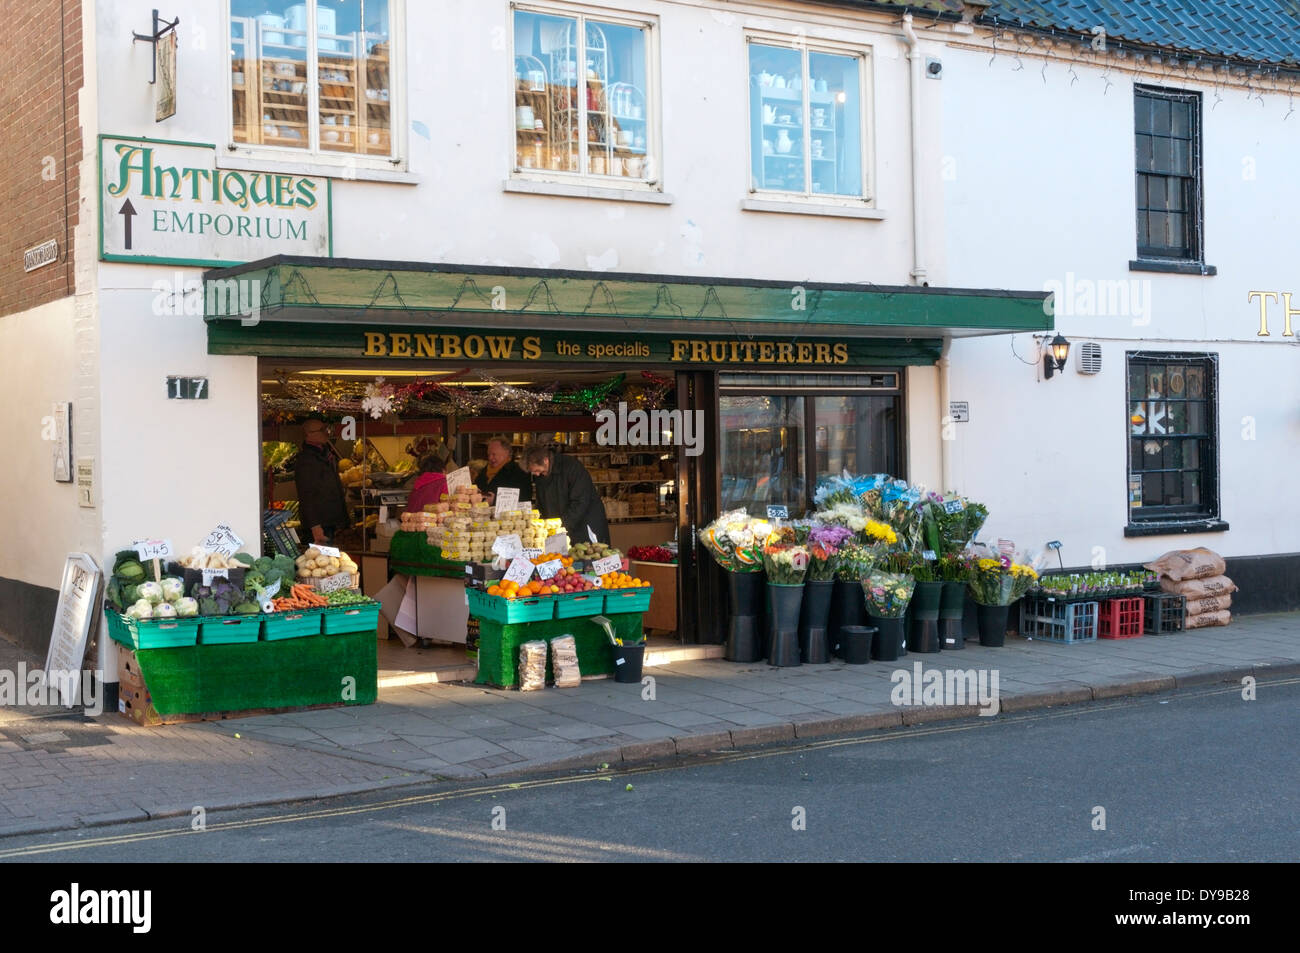 Benbows specialist fruiterers and greengrocers in Holt, Norfolk Stock Photo